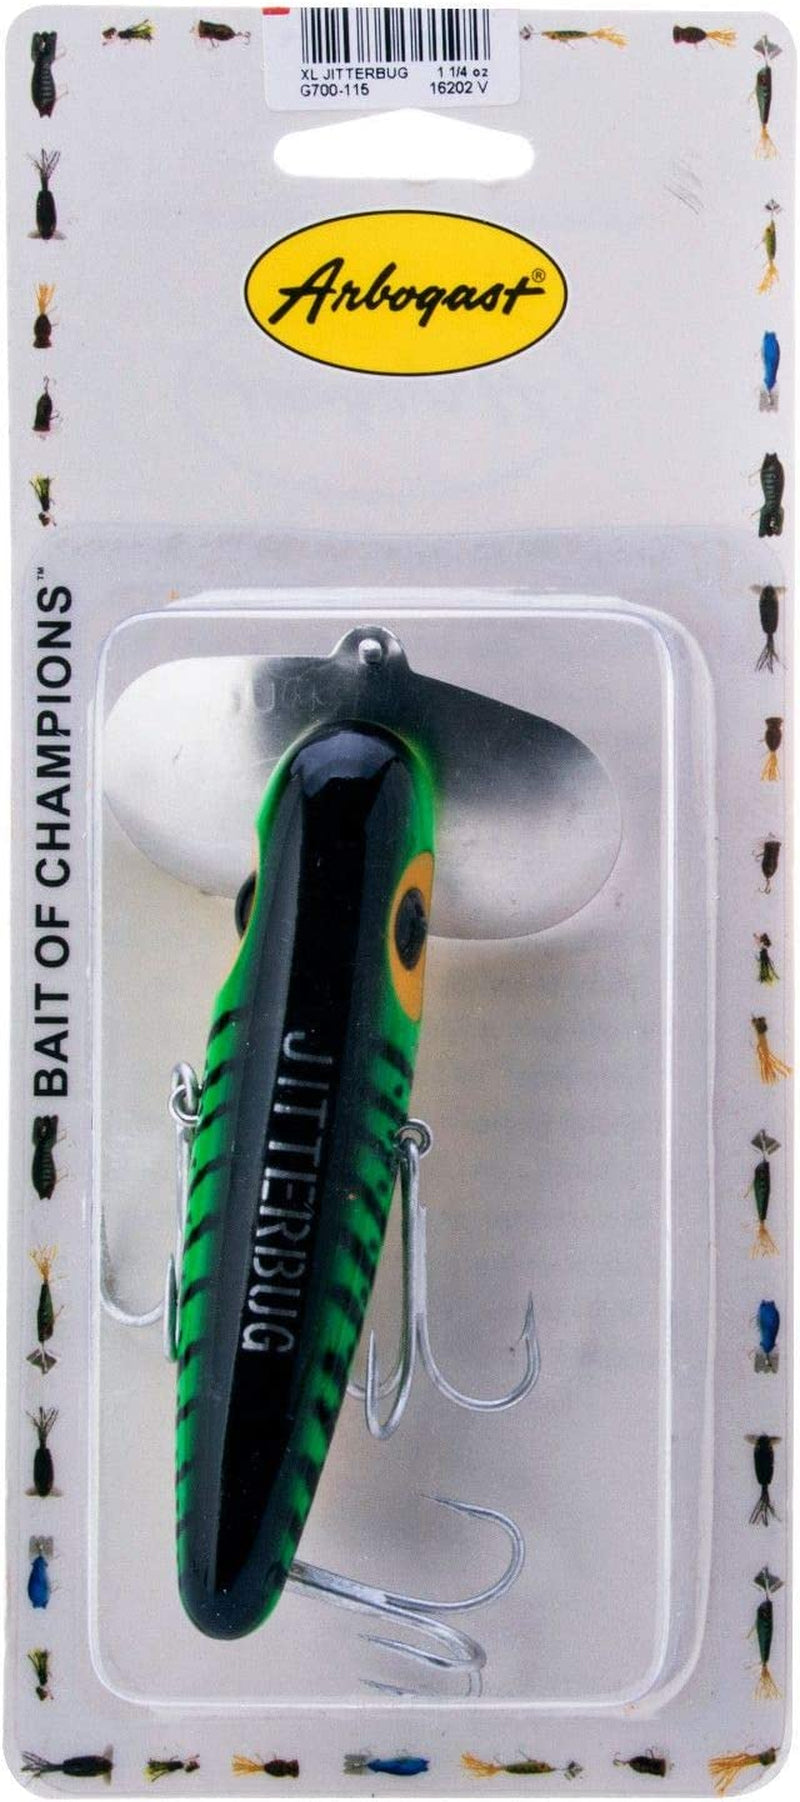 Arbogast Jitterbug Topwater Bass Fishing Lure - Excellent for Night Fishing Sporting Goods > Outdoor Recreation > Fishing > Fishing Tackle > Fishing Baits & Lures Pradco Outdoor Brands   